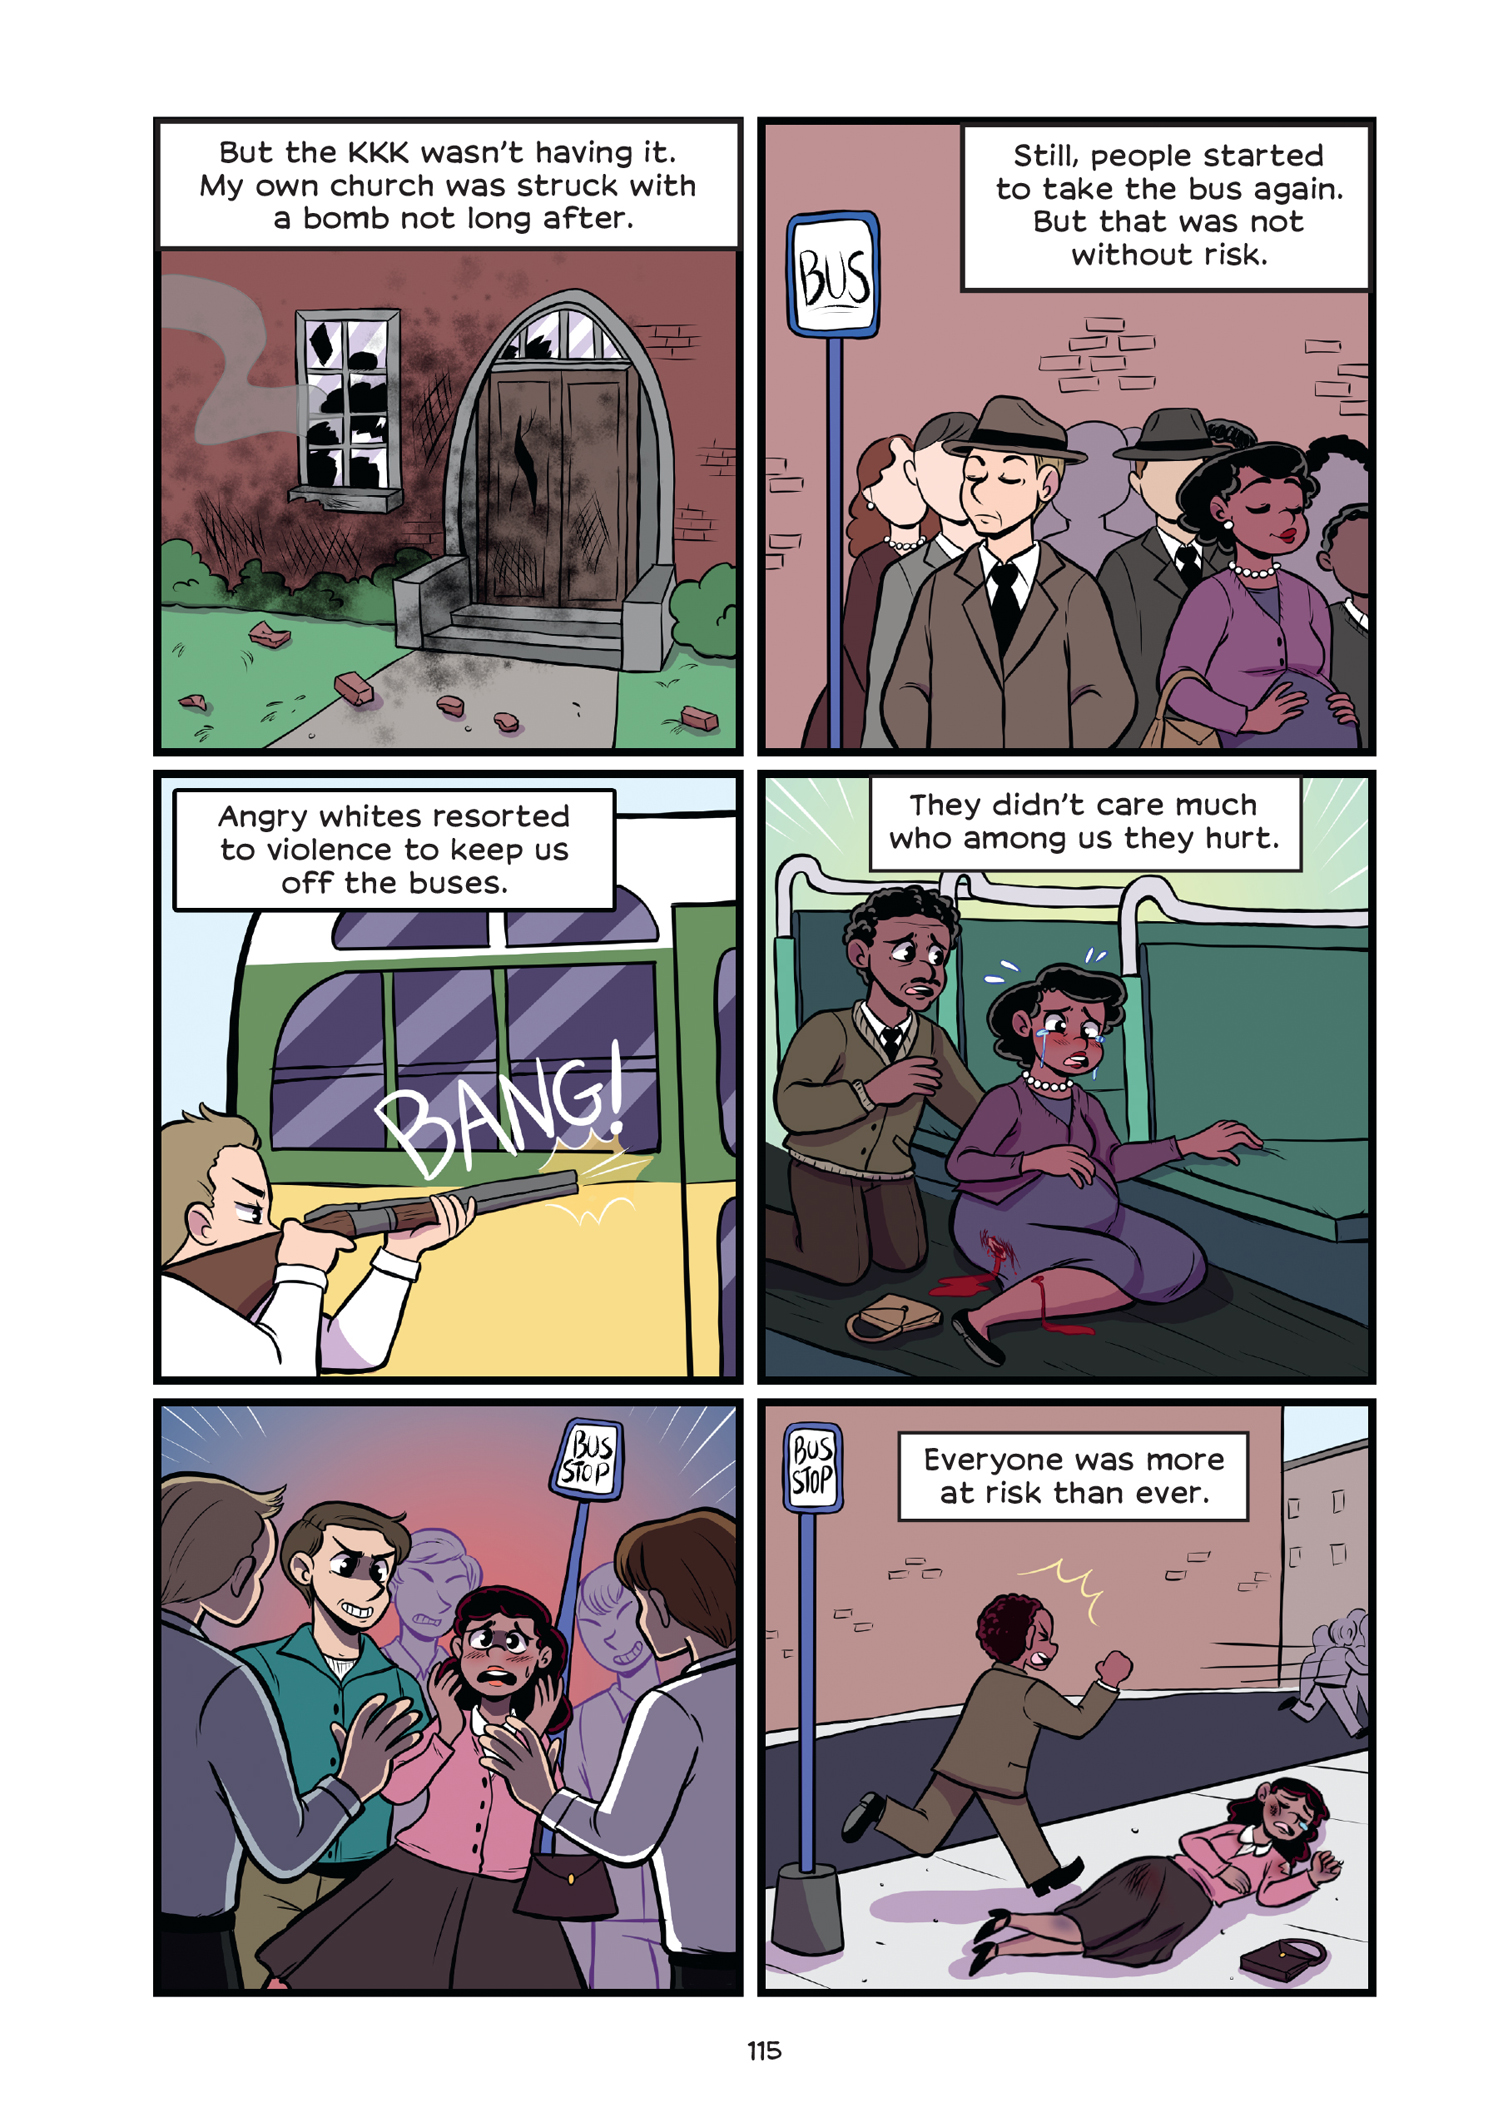 Read online History Comics comic -  Issue # Rosa Parks & Claudette Colvin - Civil Rights Heroes - 120